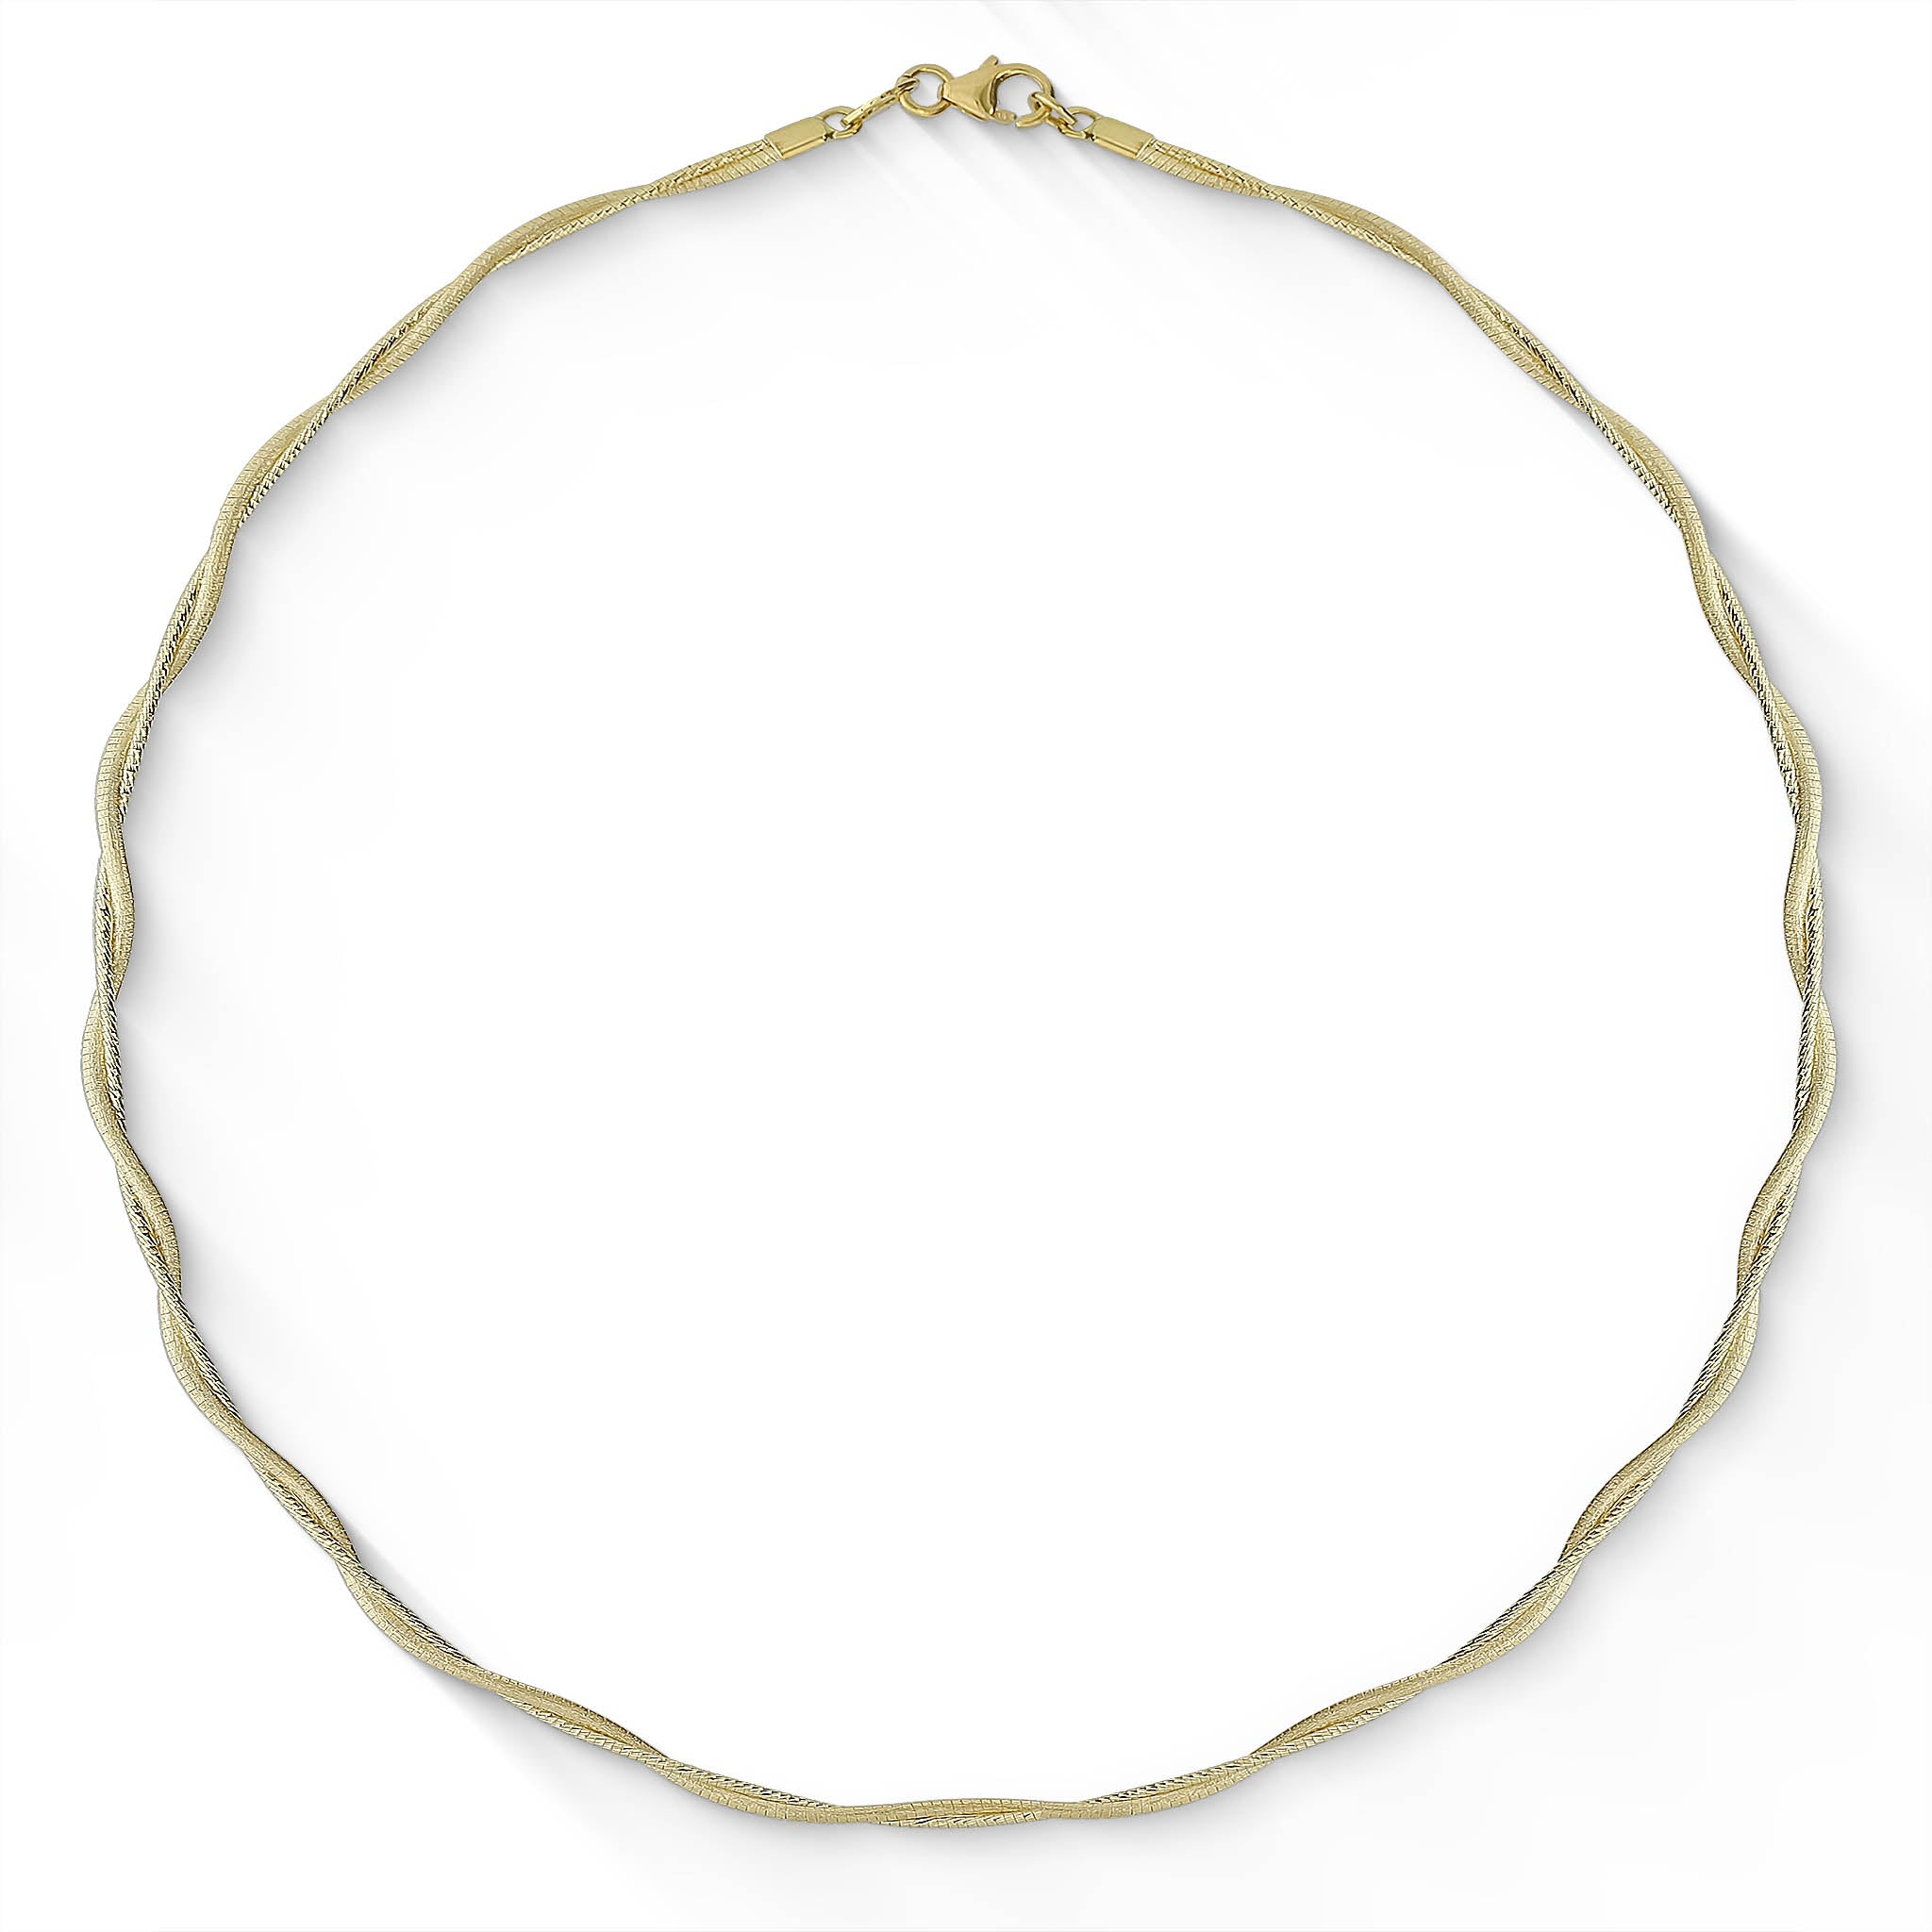 14k Yellow Gold Omega Necklace, 15 inches - 37.3g - Ruby Lane